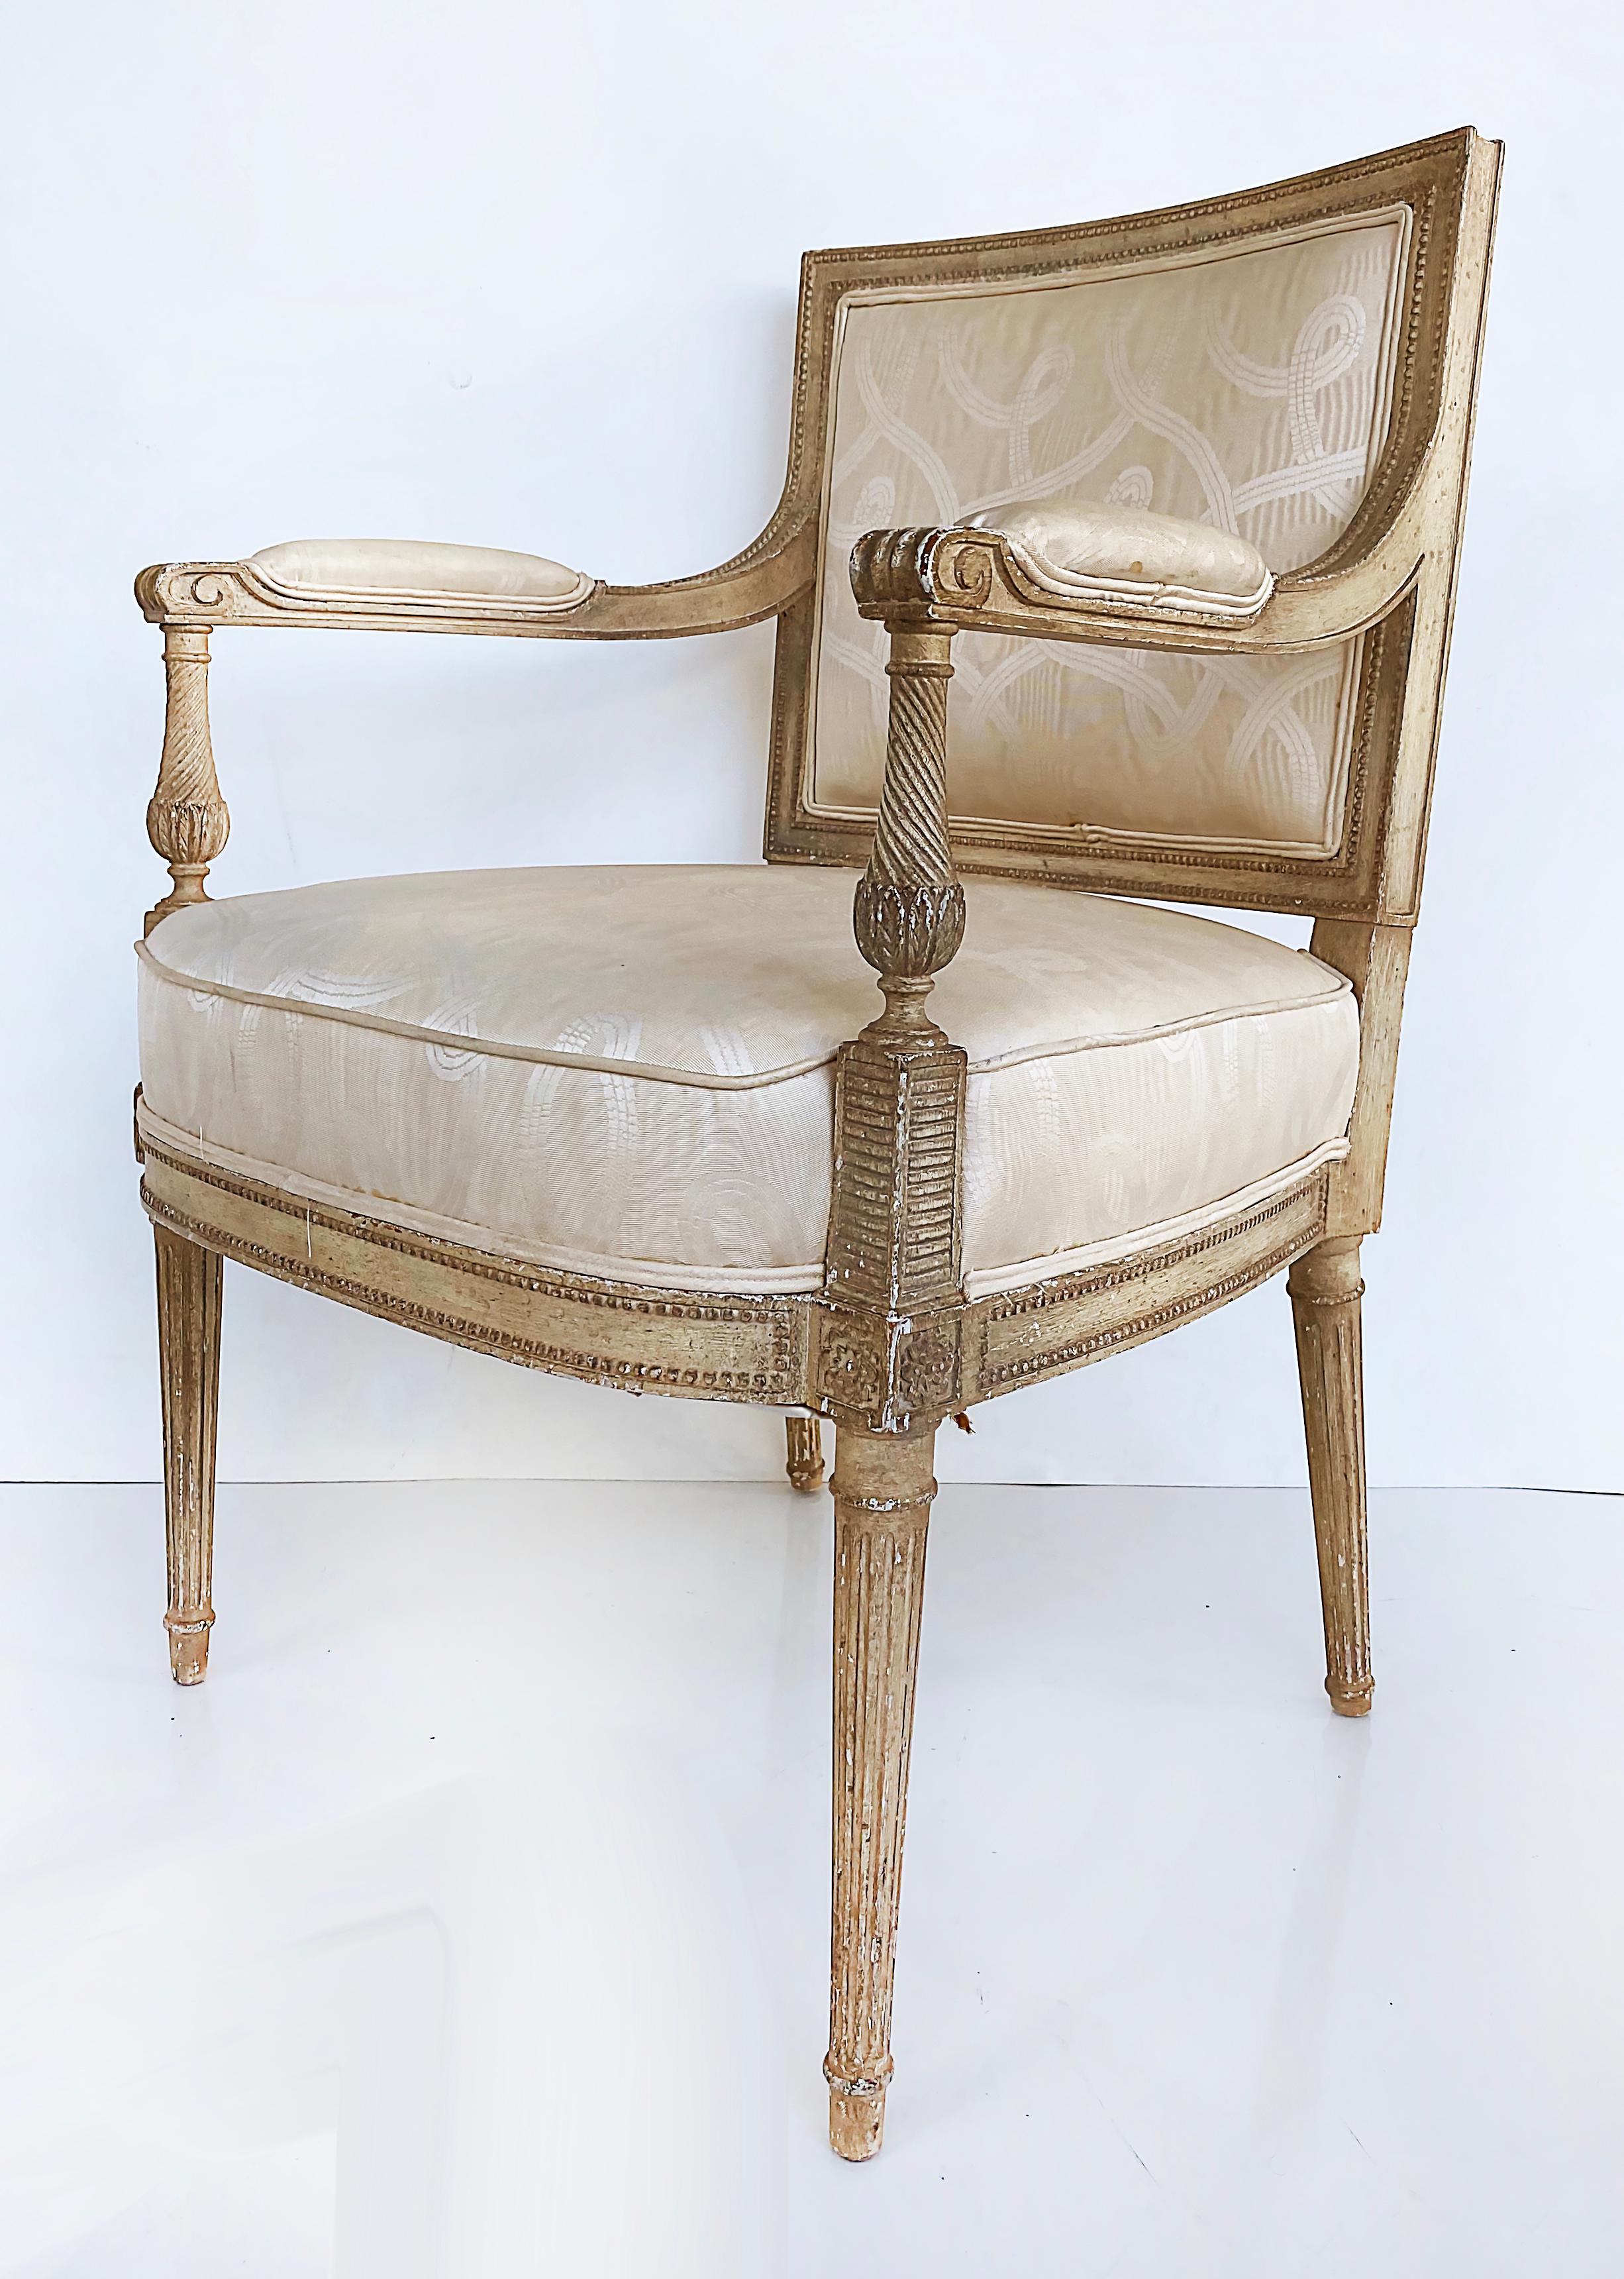 French Louis XVI Style Painted Fauteuil Armchairs, Late 19th Century -Early 20th

Offered for sale is a pair of French Louis XVI style painted fauteuil armchairs. The chairs are either late 19th-century or early 20th century. The are beautifully